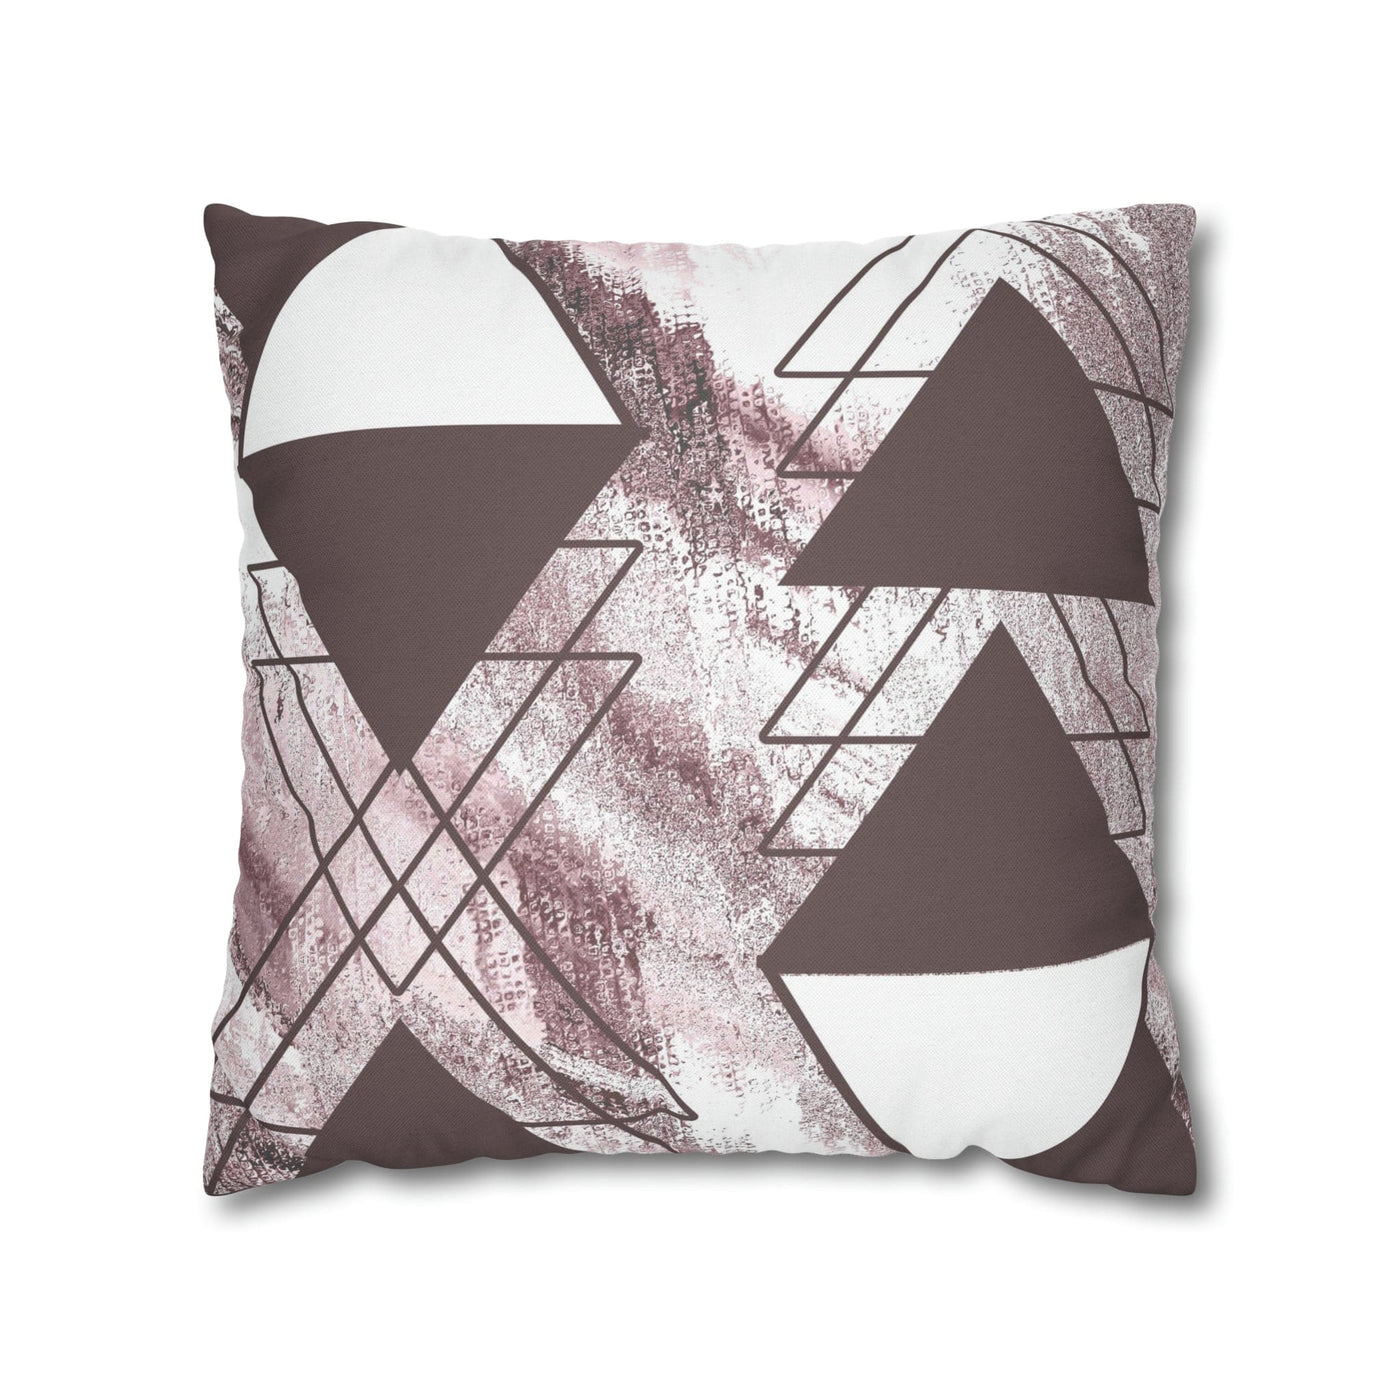 Decorative Throw Pillow Covers With Zipper - Set Of 2 Mauve Rose And White